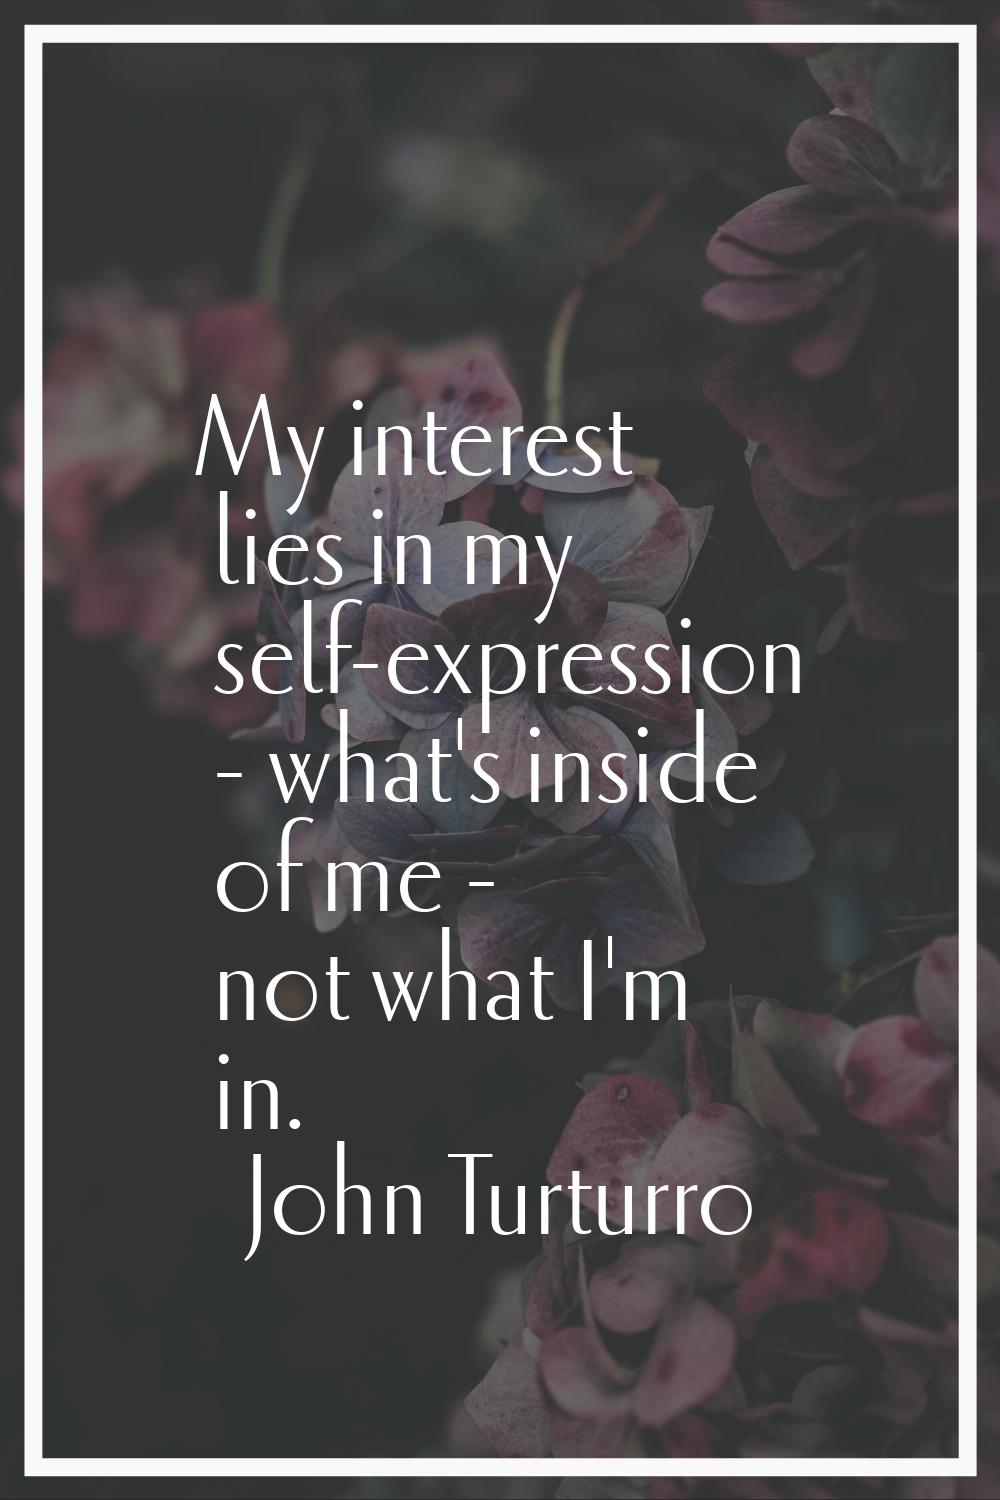 My interest lies in my self-expression - what's inside of me - not what I'm in.